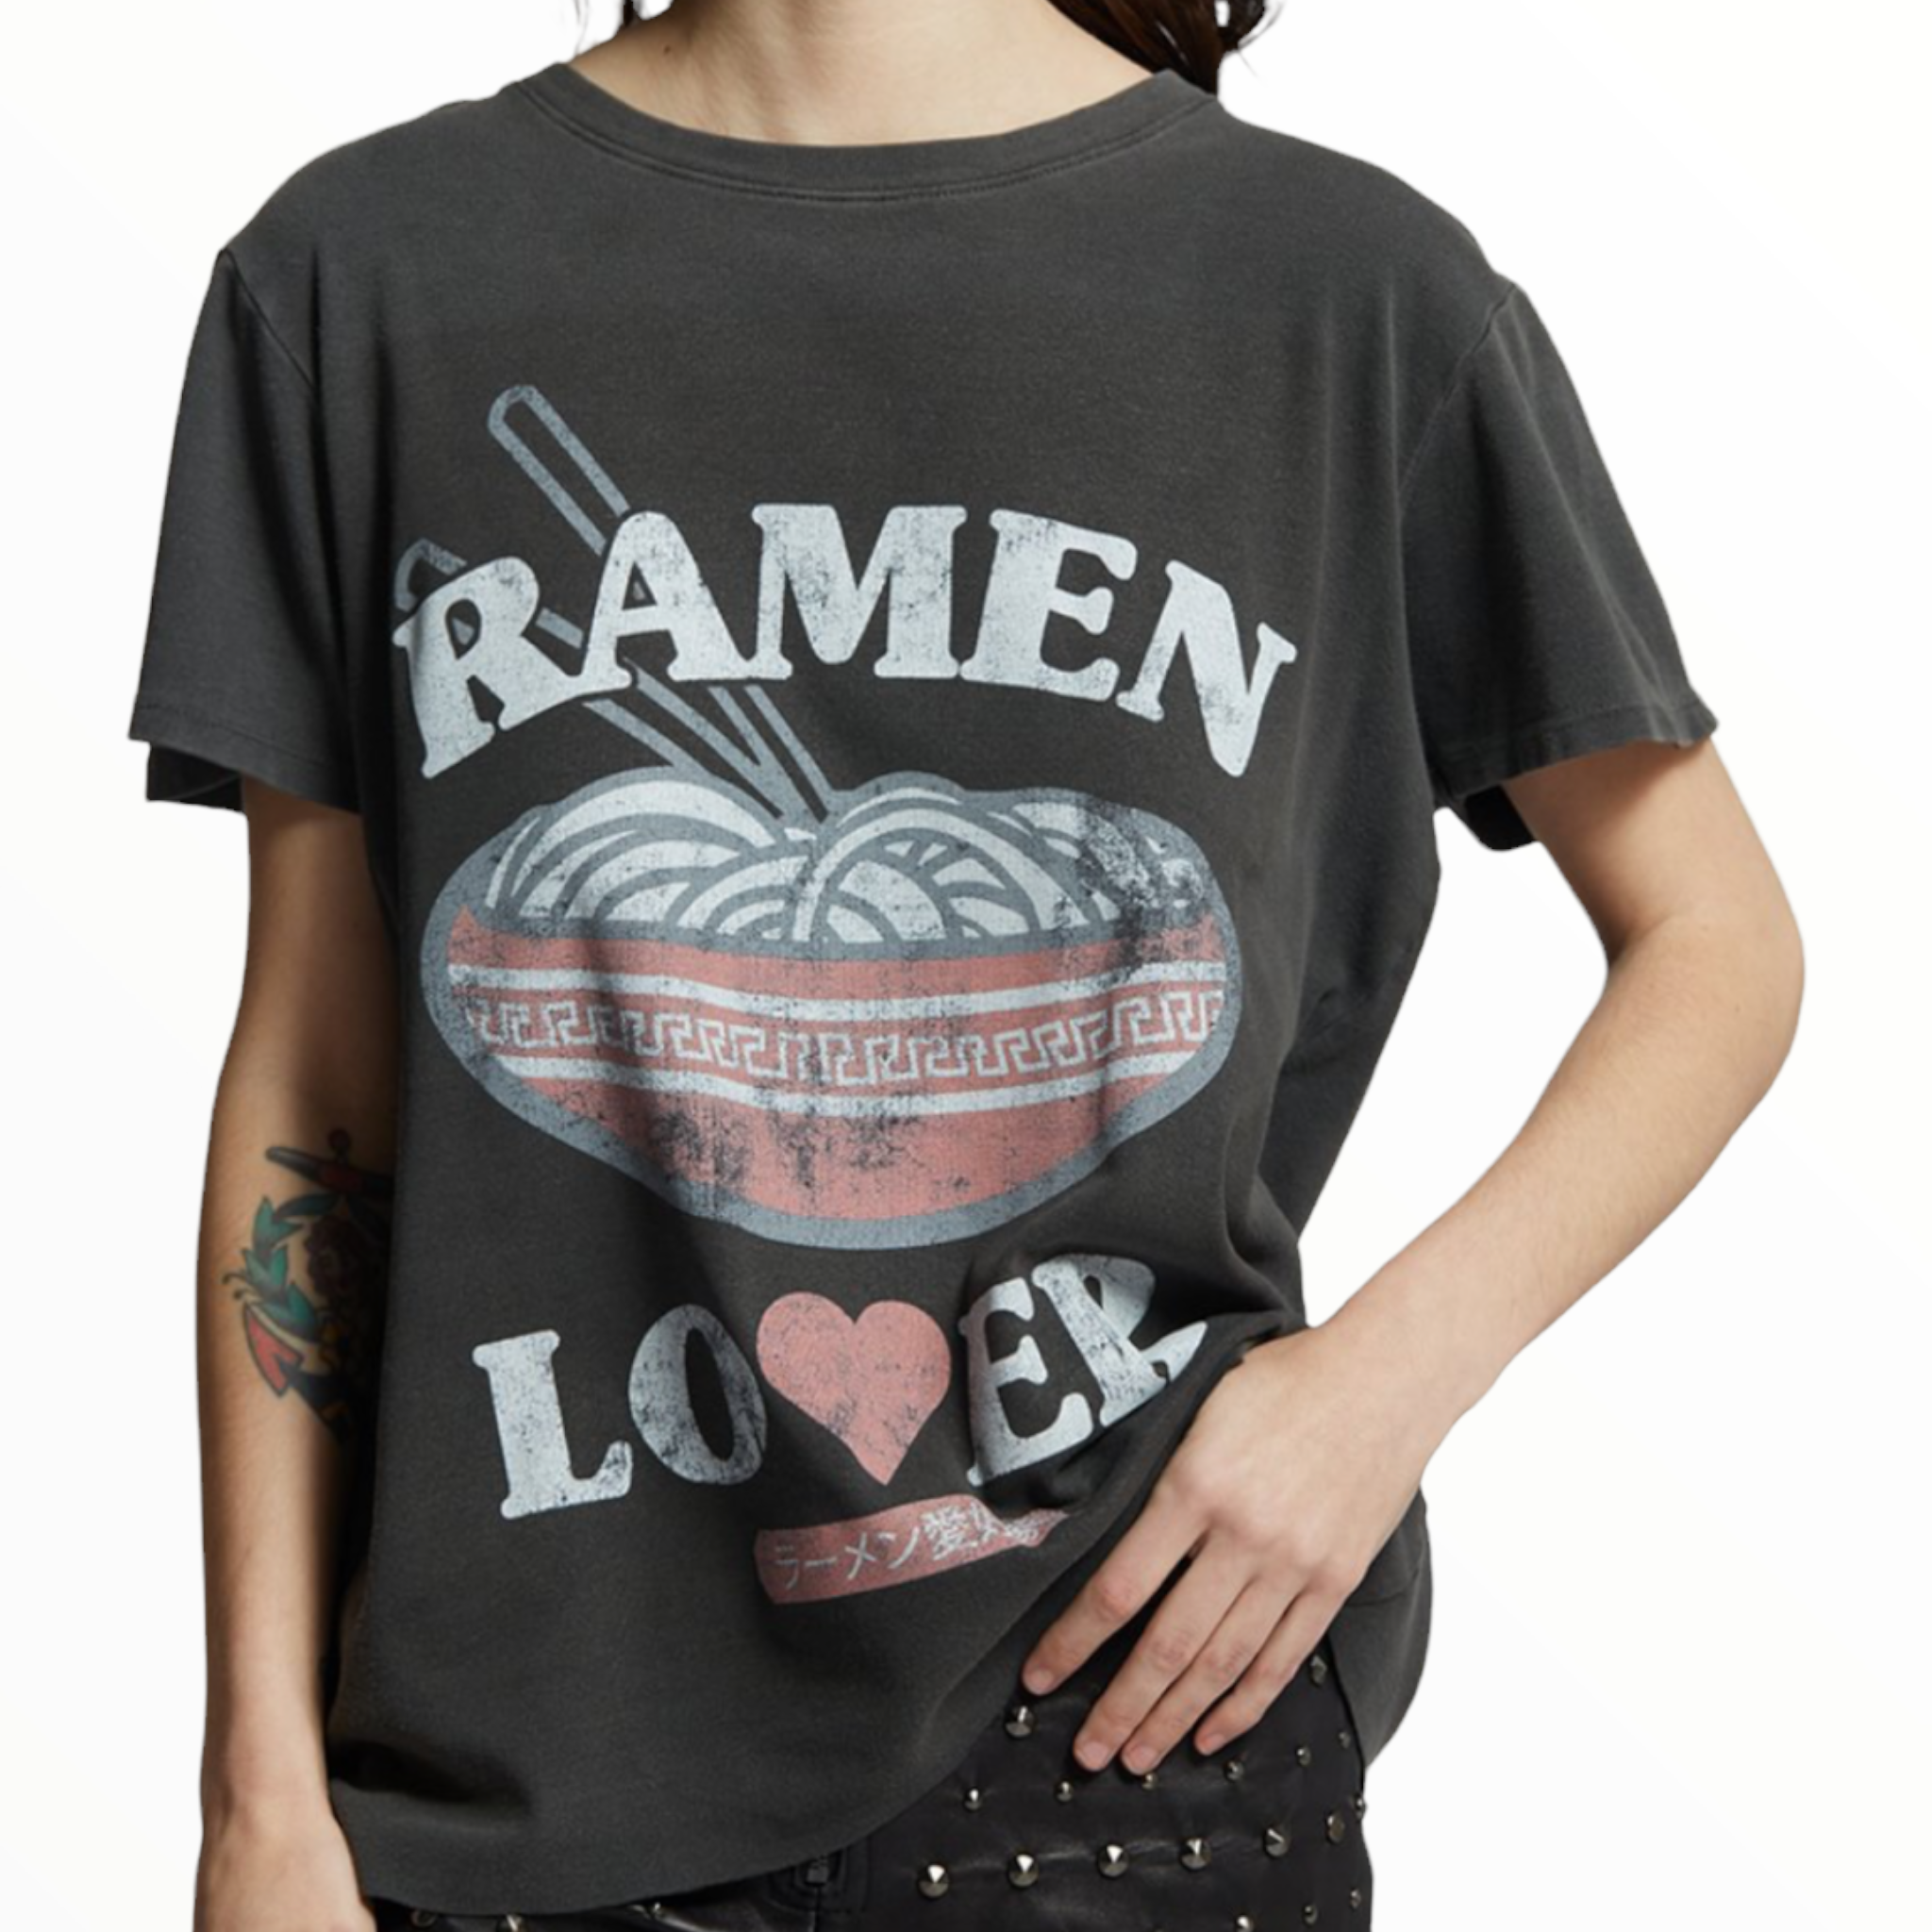 Ramen Lover Members Only T-Shirt - Recycled Karma